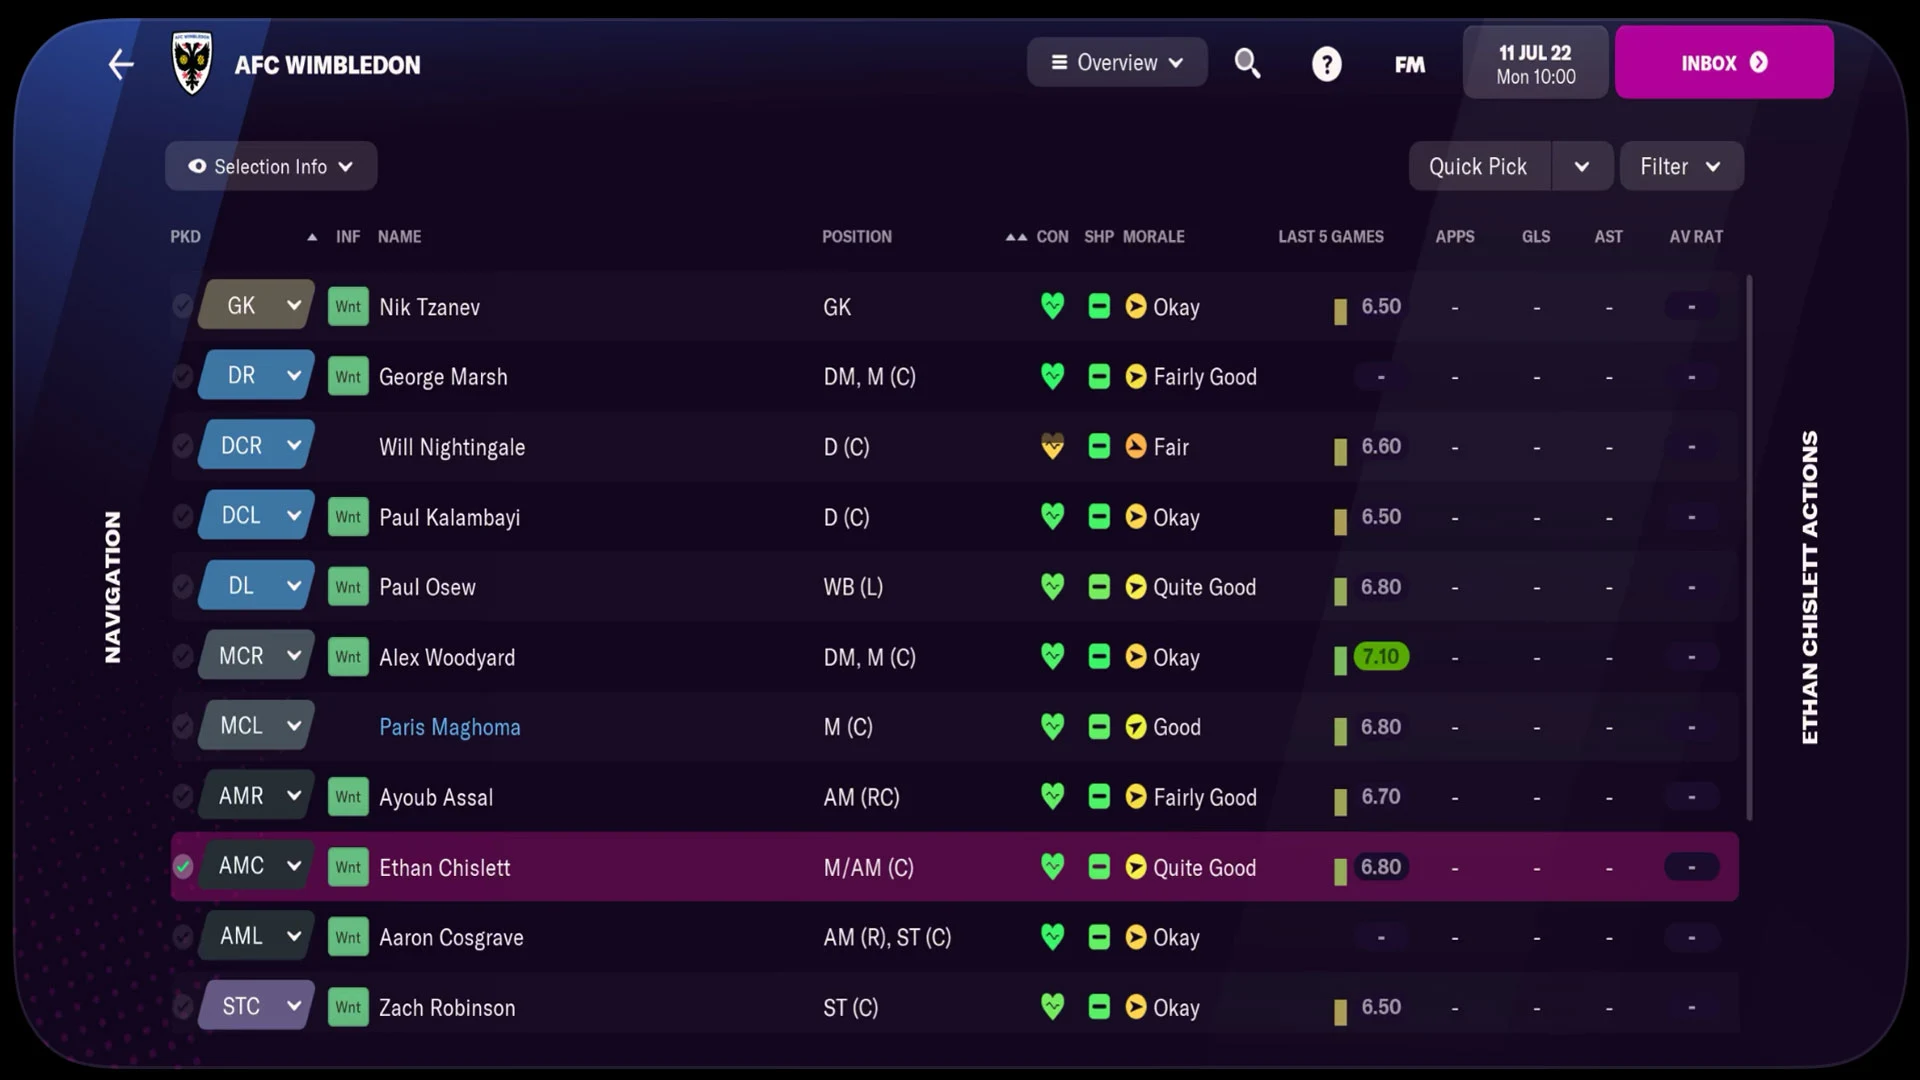 Football Manager 2023 PC DOWNLOAD,get Football Manager 2023 for PC,How to download Football Manager 2023,Football Manager 2023 for free,download Football Manager 2023 for PC, Football Manager 2023 codex, Football Manager 2023 crack, Football Manager 2023 download, Football Manager 2023 free play, Football Manager 2023 frei, Football Manager 2023 highly compressed, Football Manager 2023 iso, Football Manager 2023 jeux, Football Manager 2023 keygen, Football Manager 2023 scaricare, Football Manager 2023 skidrow, Football Manager 2023 Télécharger, Football Manager 2023 torrent, Football Manager 20233 herunterladen, Free download Football Manager 2023, How to download Football Manager 2023